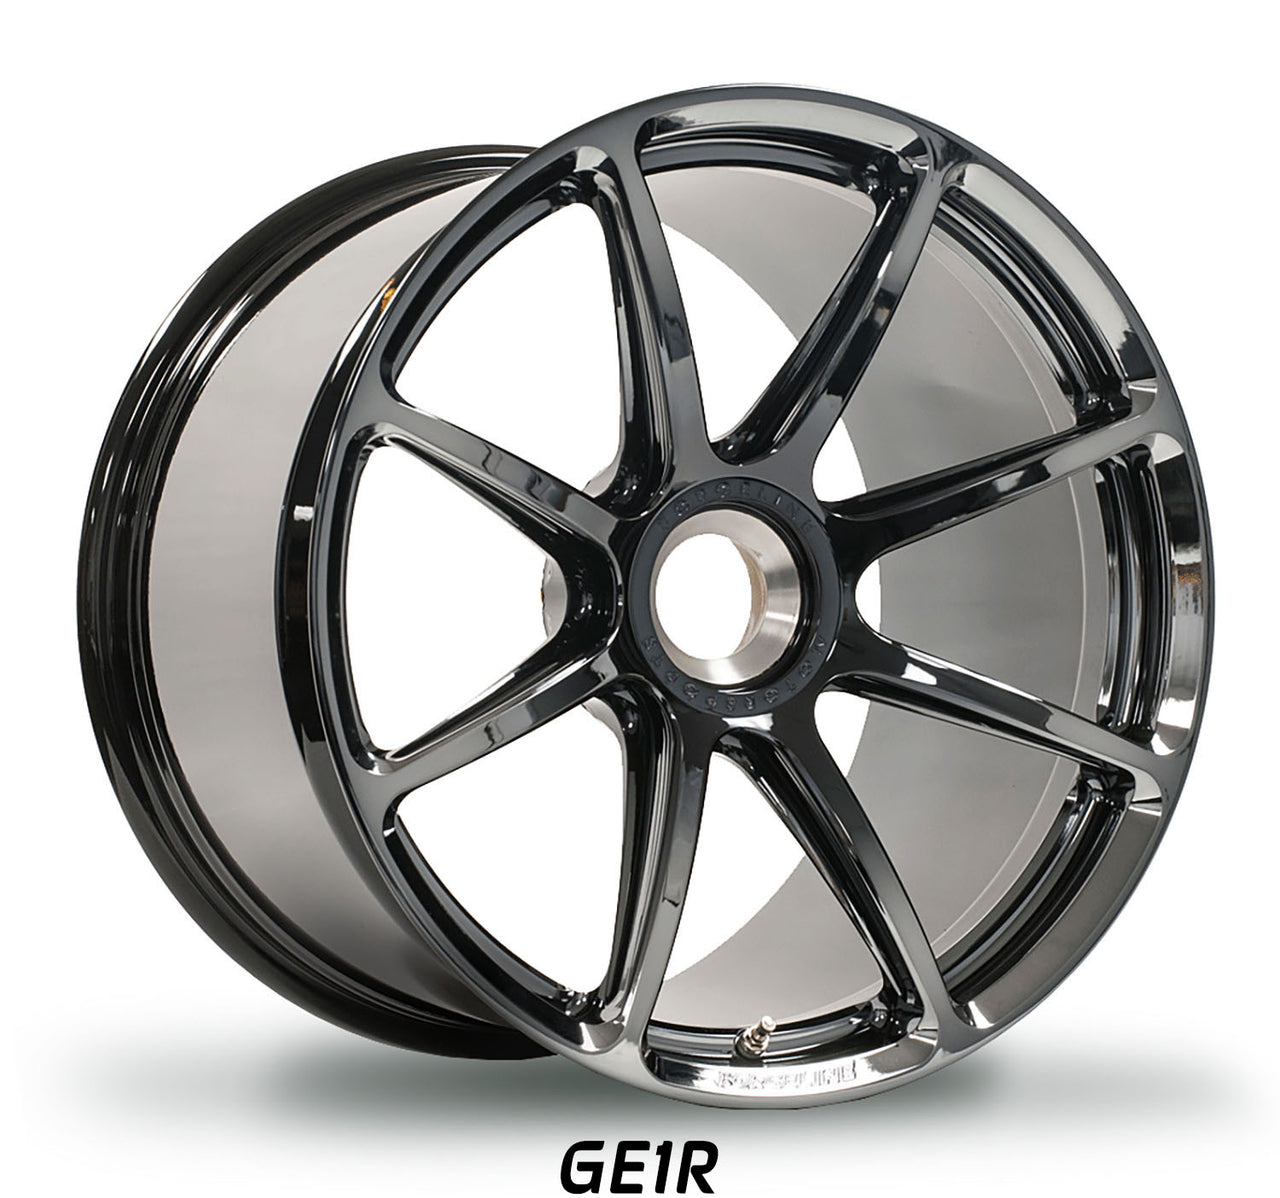 Forgeline GE1R forged racing wheel in Gloss Black for Porsche 992 GT3RS centerlock hubs